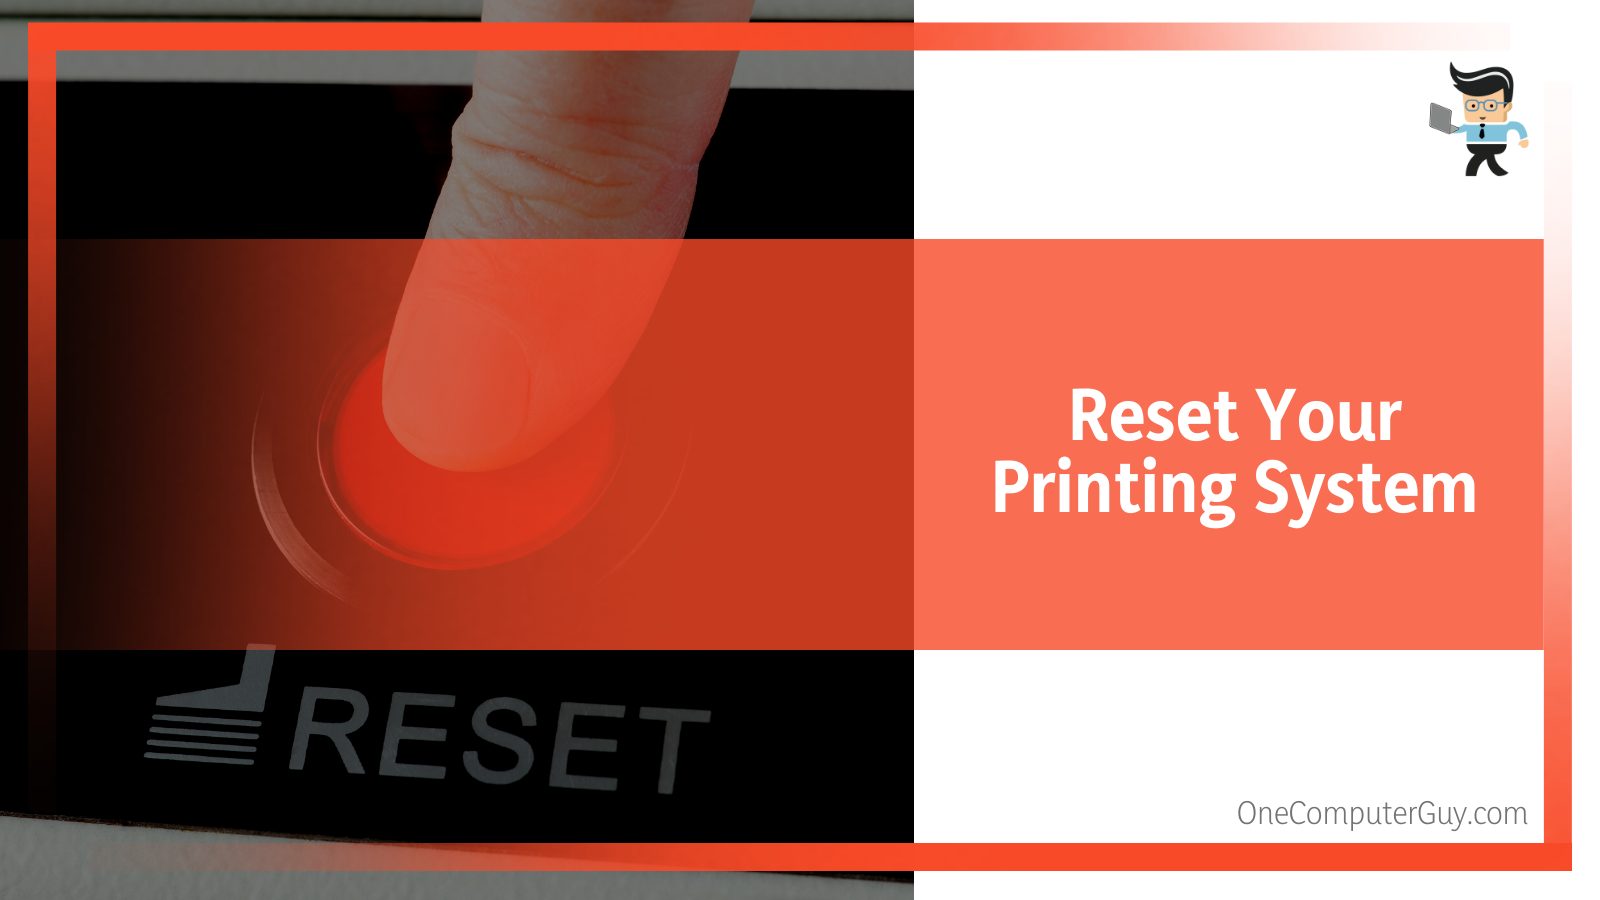 Reset Your Printing System